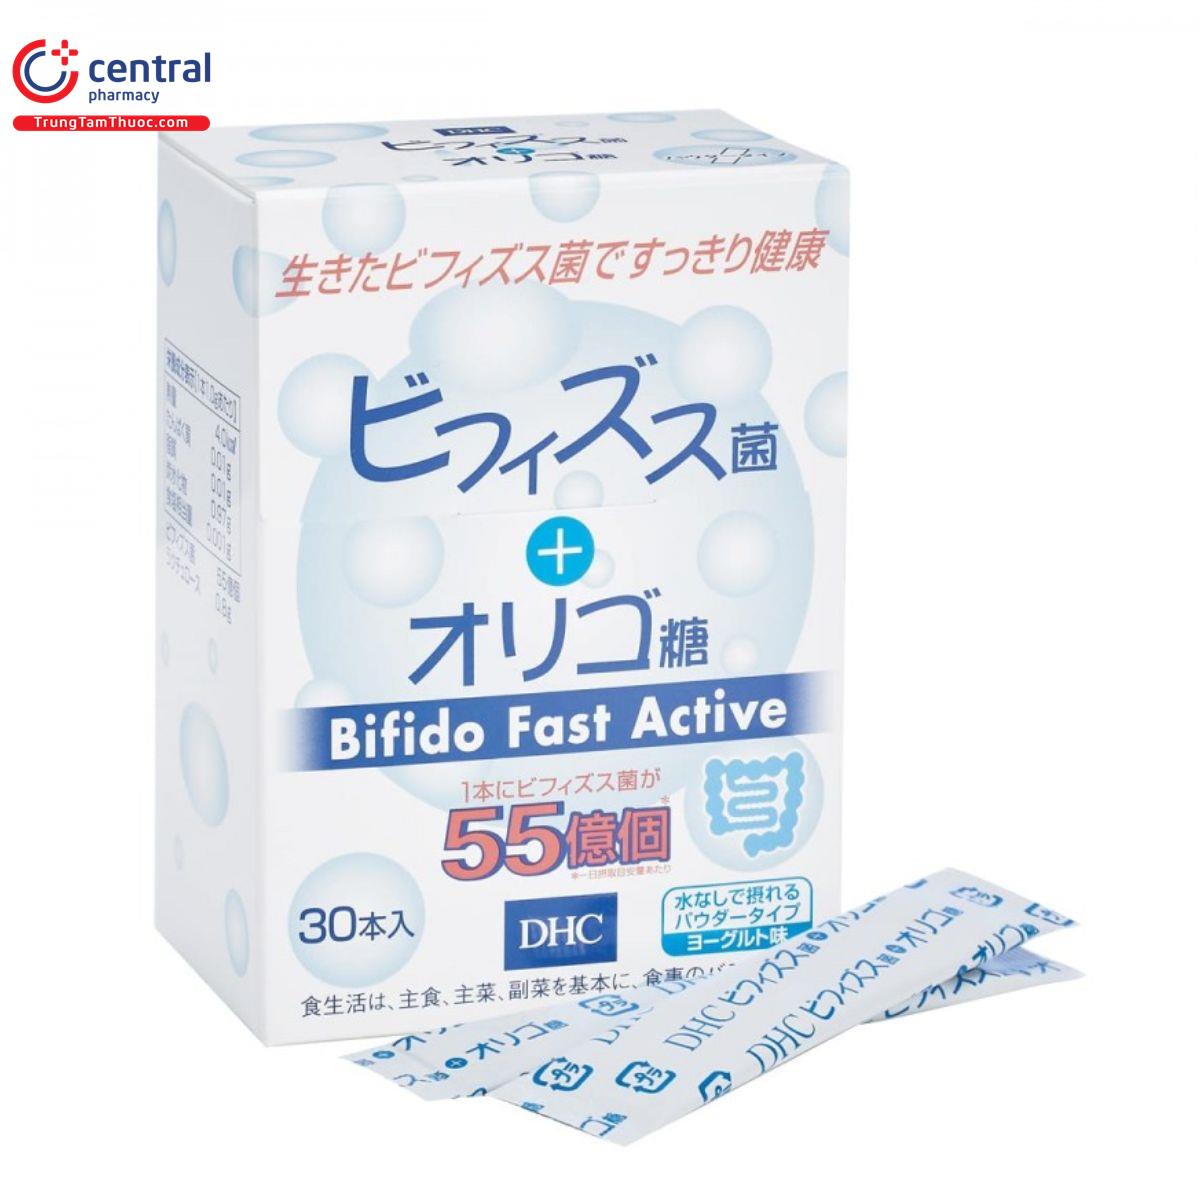 dhc bifido fast active 5 O6503